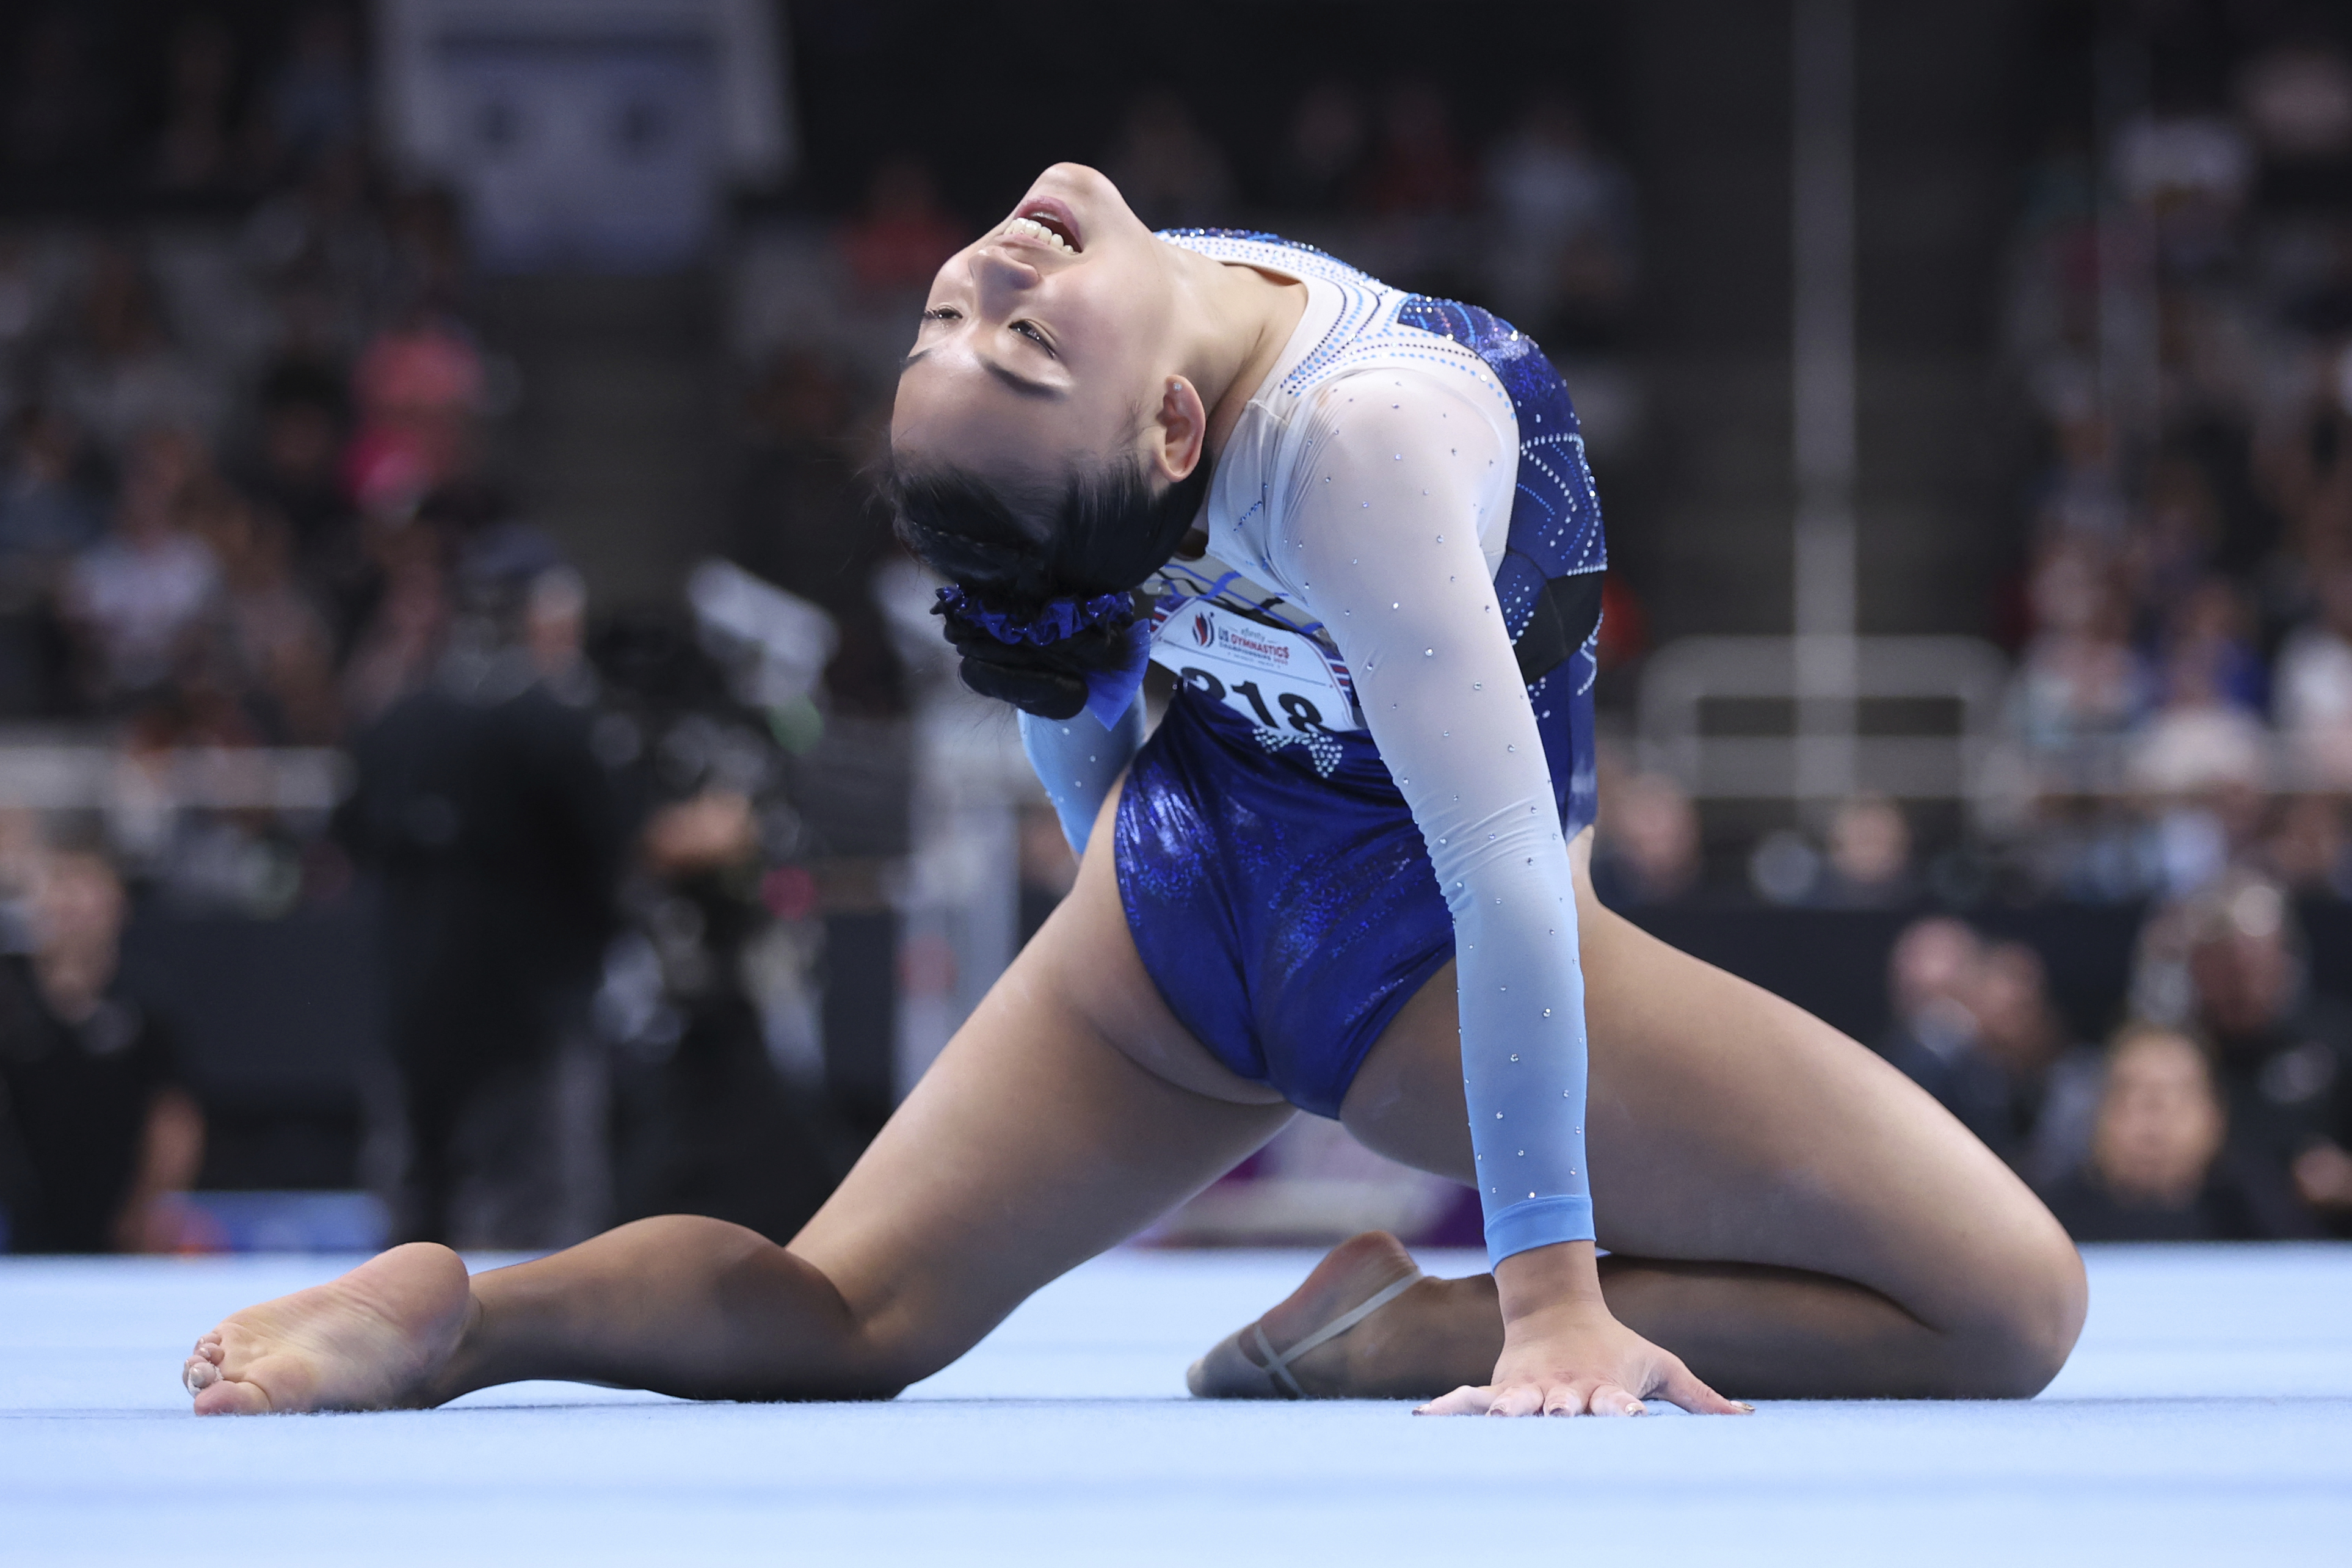 Leanne Wong Joins U.S. Gymnastics Olympic Team as a Replacement Athlete -  Florida Gators